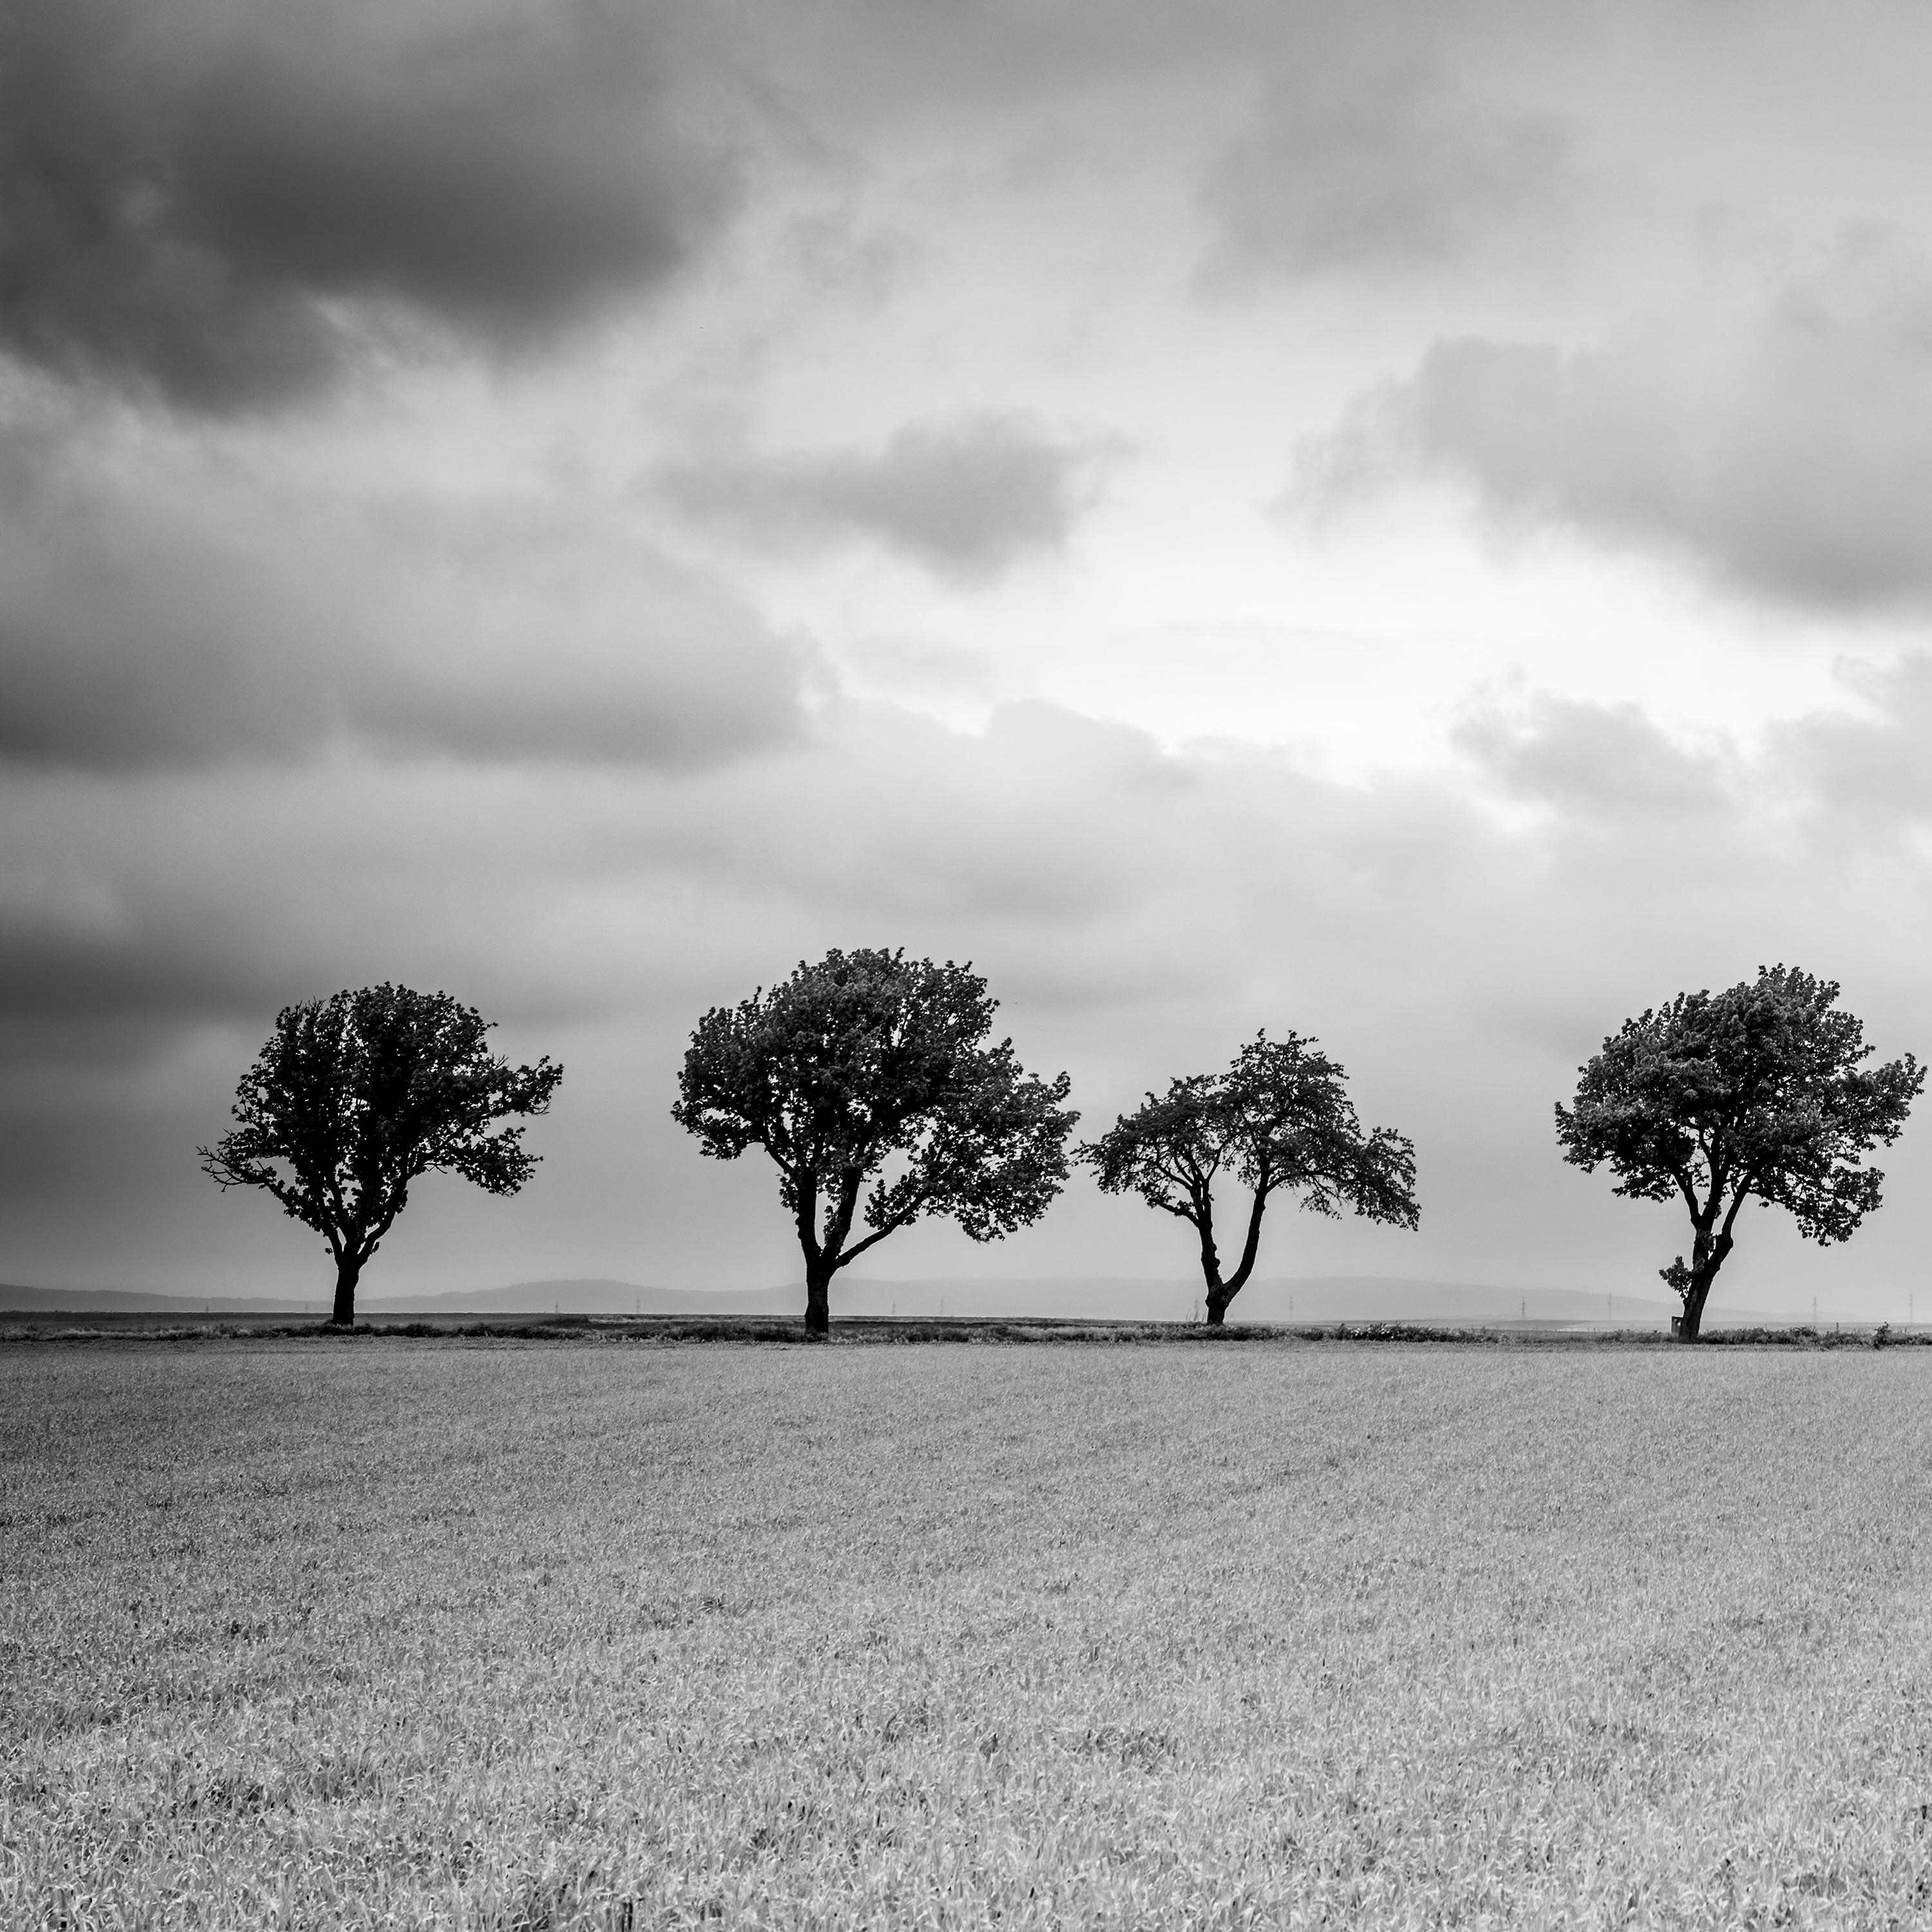 The Trees on the edge of Field, cloudy, storm, black white art landscape photography en vente 4